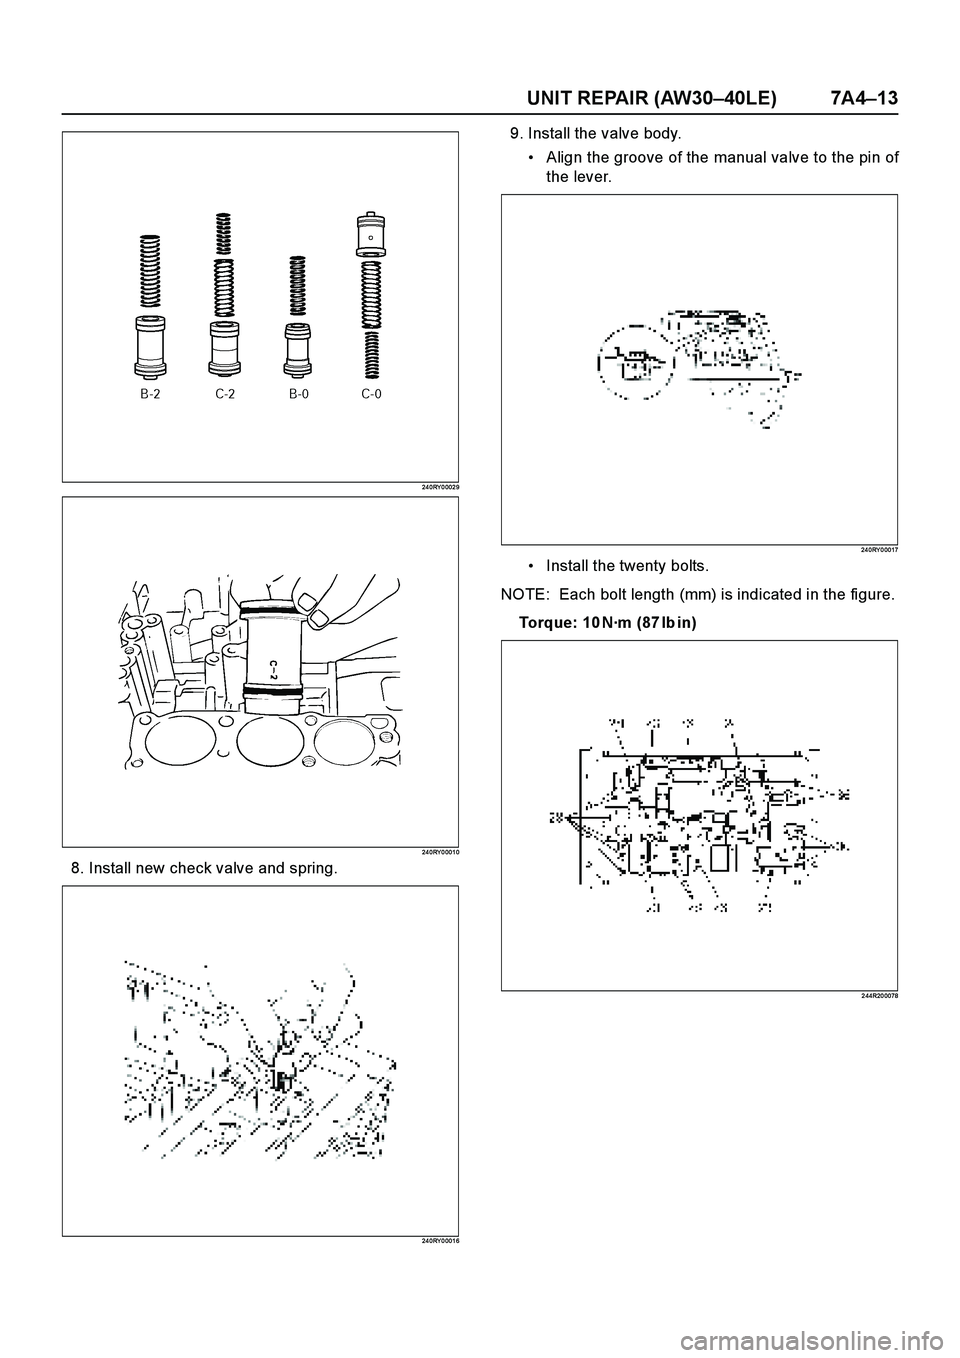 ISUZU TF SERIES 2004  Workshop Manual UNIT REPAIR (AW30–40LE) 7A4–13
24 0RY 0 002 9
24 0RY 0 001 0
8. Install new check valve and spring.
24 0RY 0 001 6
9. Install the valve body.
Align the groove of the manual valve to the pin of
th